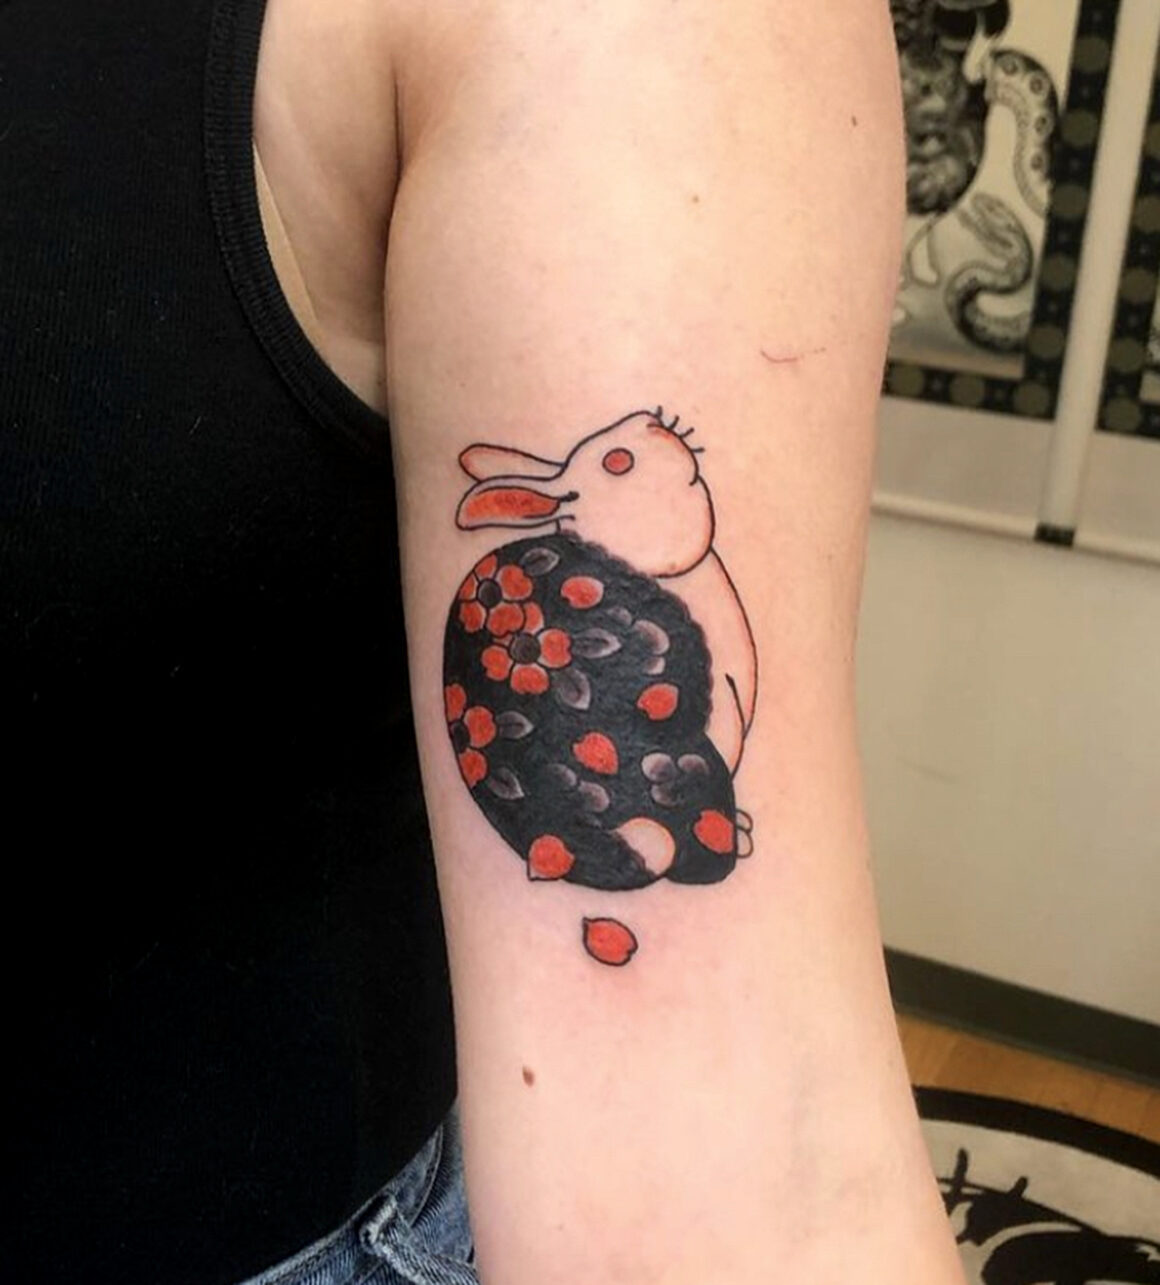 White Rabbit Tattoo Studio NYC on Instagram Japanese waves by  inkypaperclip     tattoo tattoos tattooart illustrative  illustrativetattoos illustrativetattoos fineline